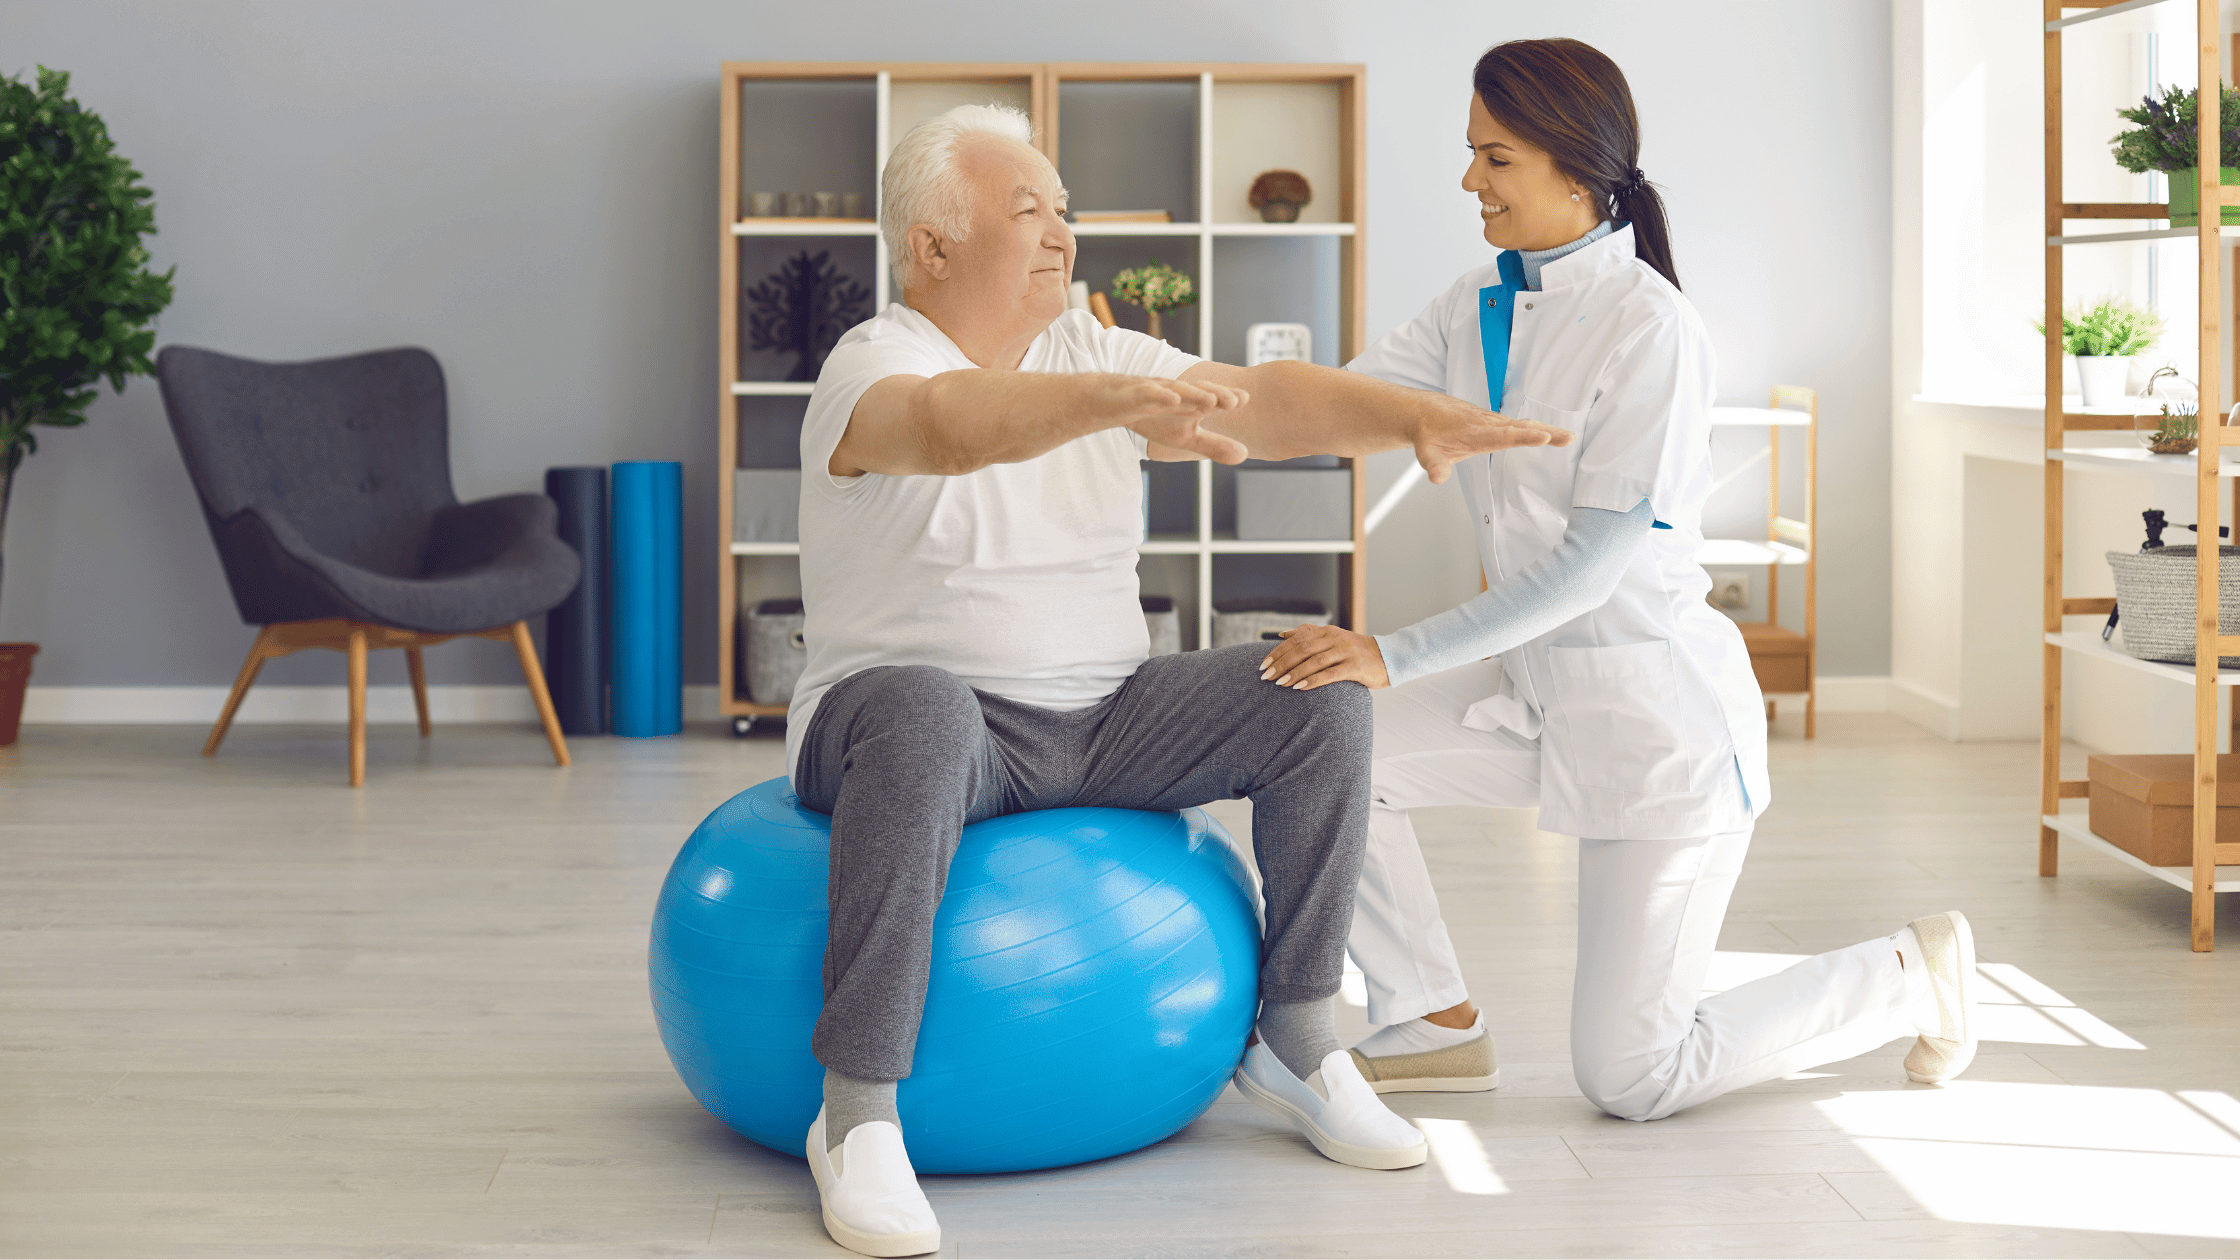 Inpatient Rehabilitation vs. Outpatient Physical Therapy: Understanding Your Options